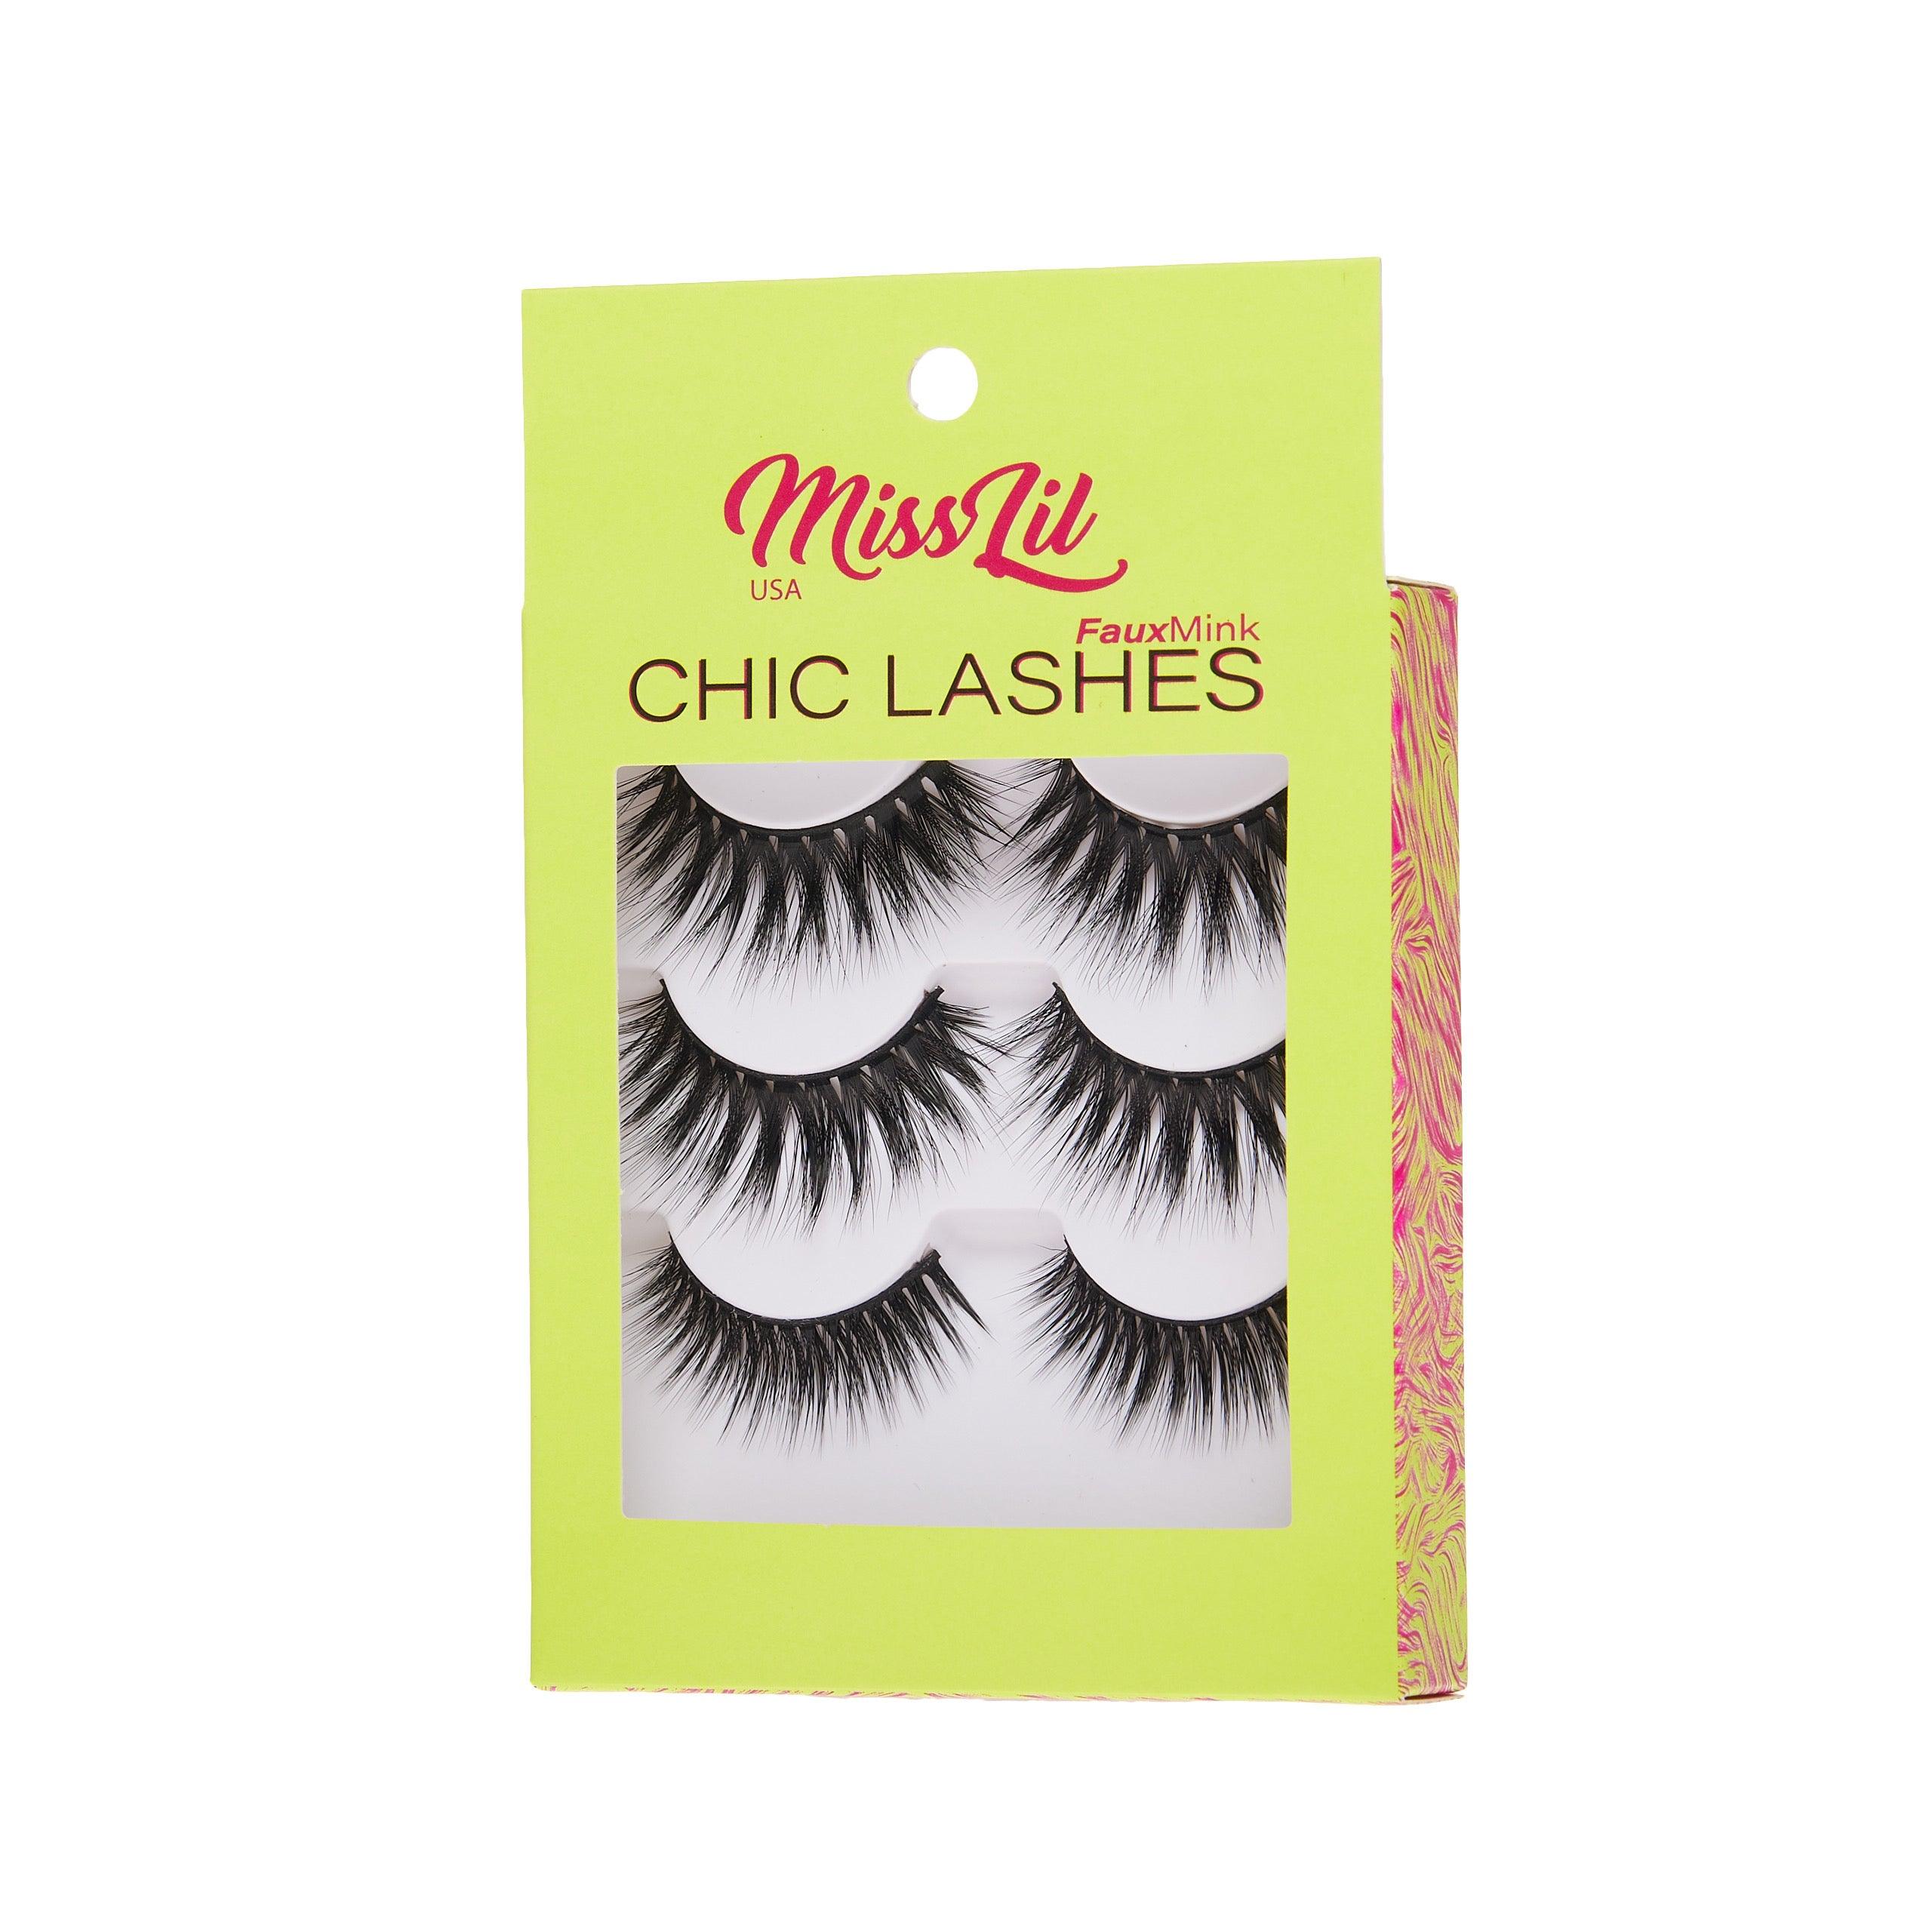 3-Pair Faux Mink Eyelashes - Chic Lashes Collection #34 - Pack of 3 - Miss Lil USA